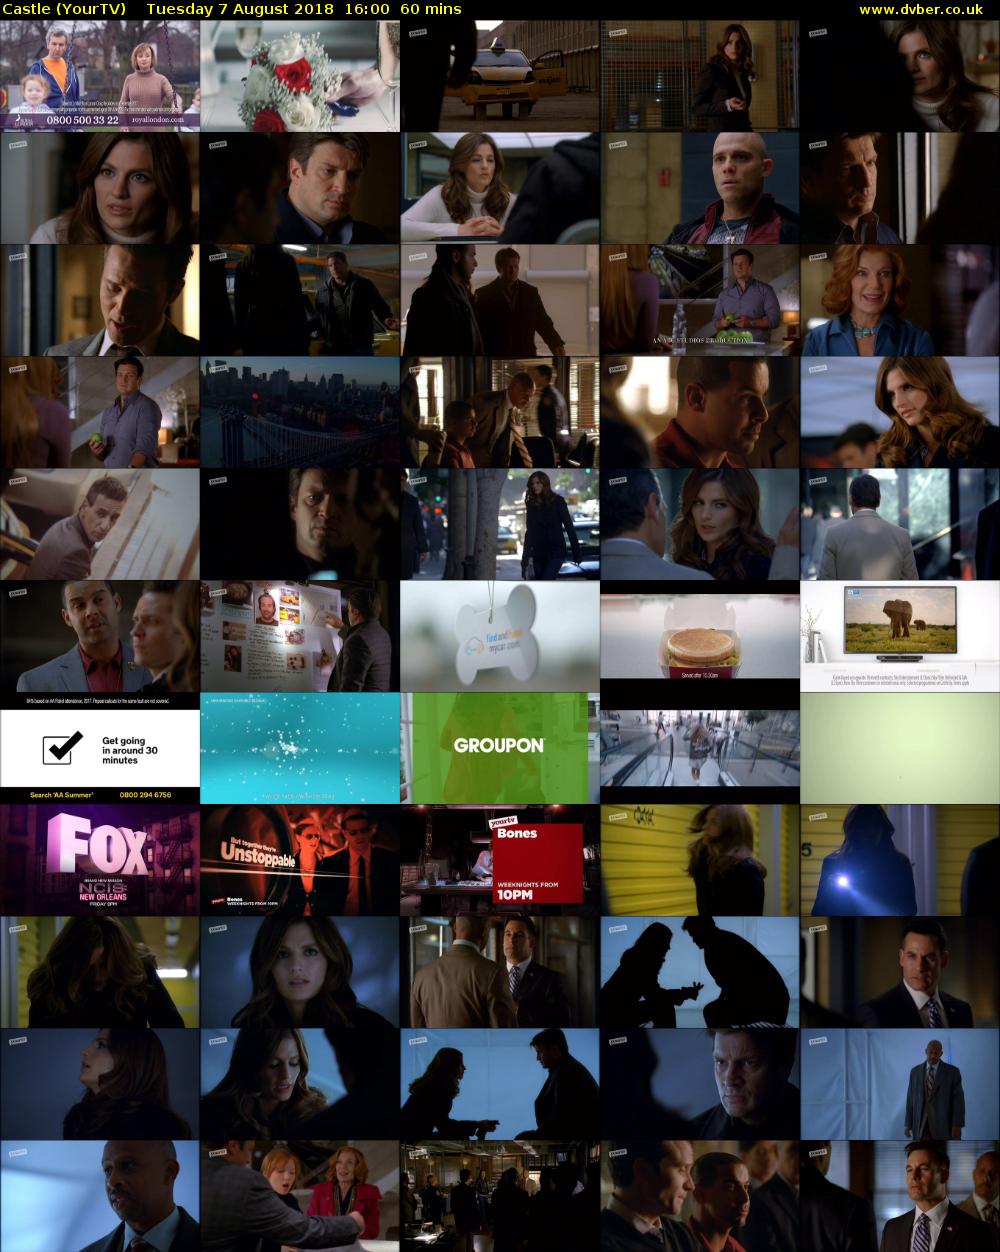 Castle (YourTV) Tuesday 7 August 2018 16:00 - 17:00